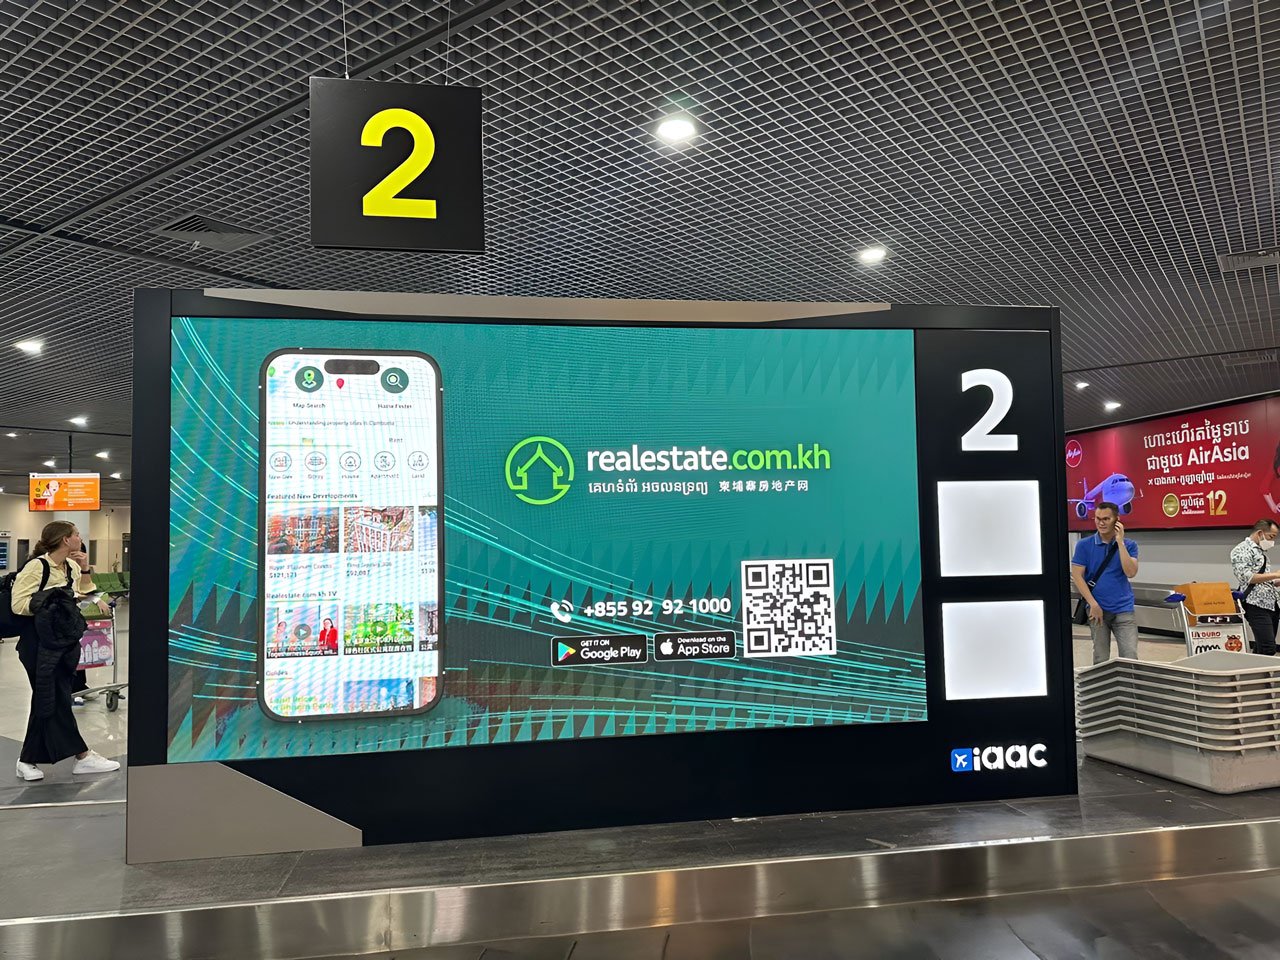 Revolutionary Digital Advertising Network at Phnom Penh Airport Connects Property Developers to Global Buyers